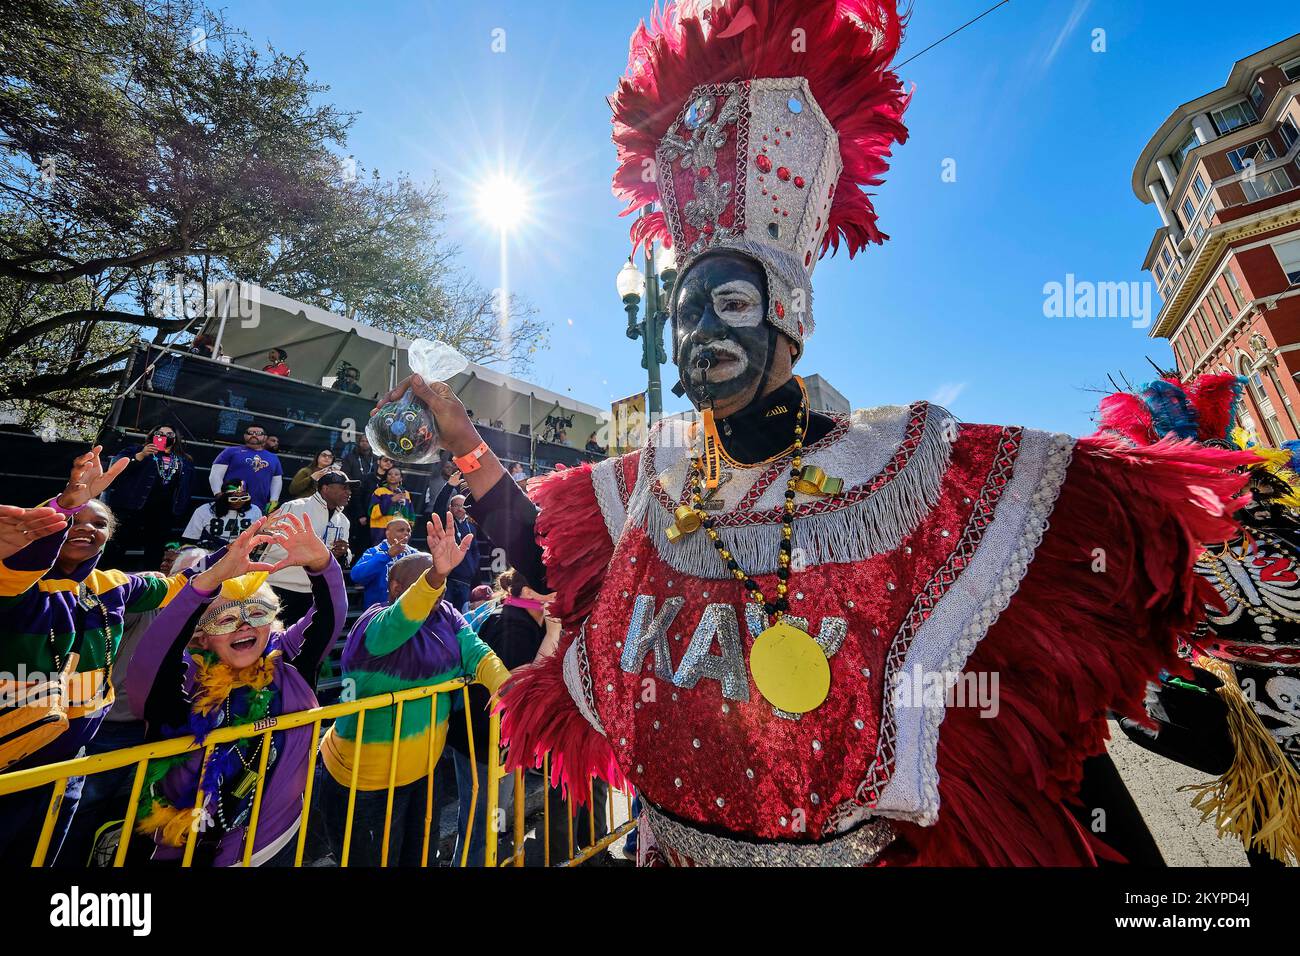 New Orleans, Louisiana, USA. 1st Mar, 2022. A member of the Zulu Social Aid and Pleasure Club Parade dances in the street as a part of Fat Tuesday Mardi Gras celebrations in New Orleans, Louisiana USA on March 01, 2022. Mardi Gras parades and festivities were cancelled in the city last year due to the Covid-19 pandemic. (Credit Image: © Dan Anderson/ZUMA Press Wire) Stock Photo